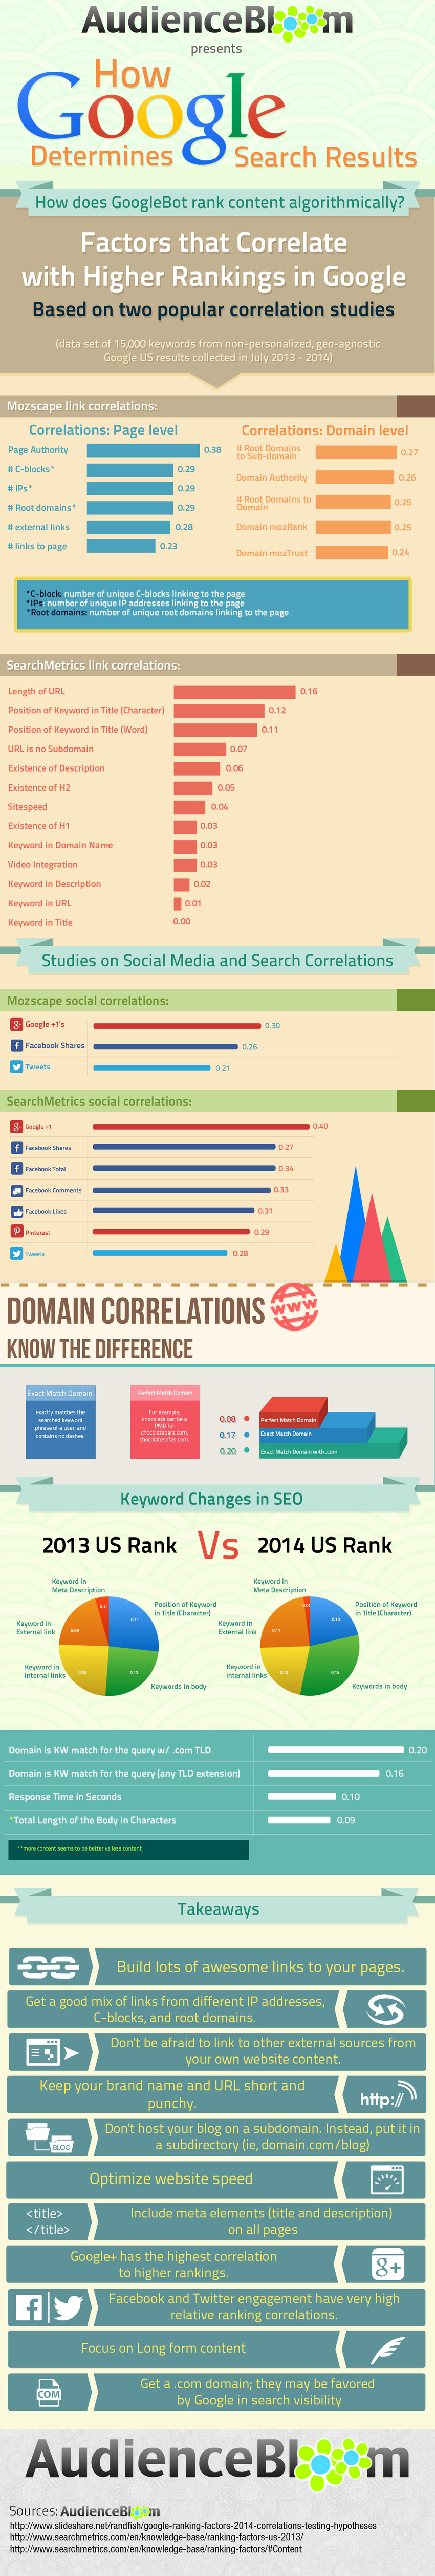 How Google Determines Search Results [Infographic] - Socially Stacked | The MarTech Digest | Scoop.it